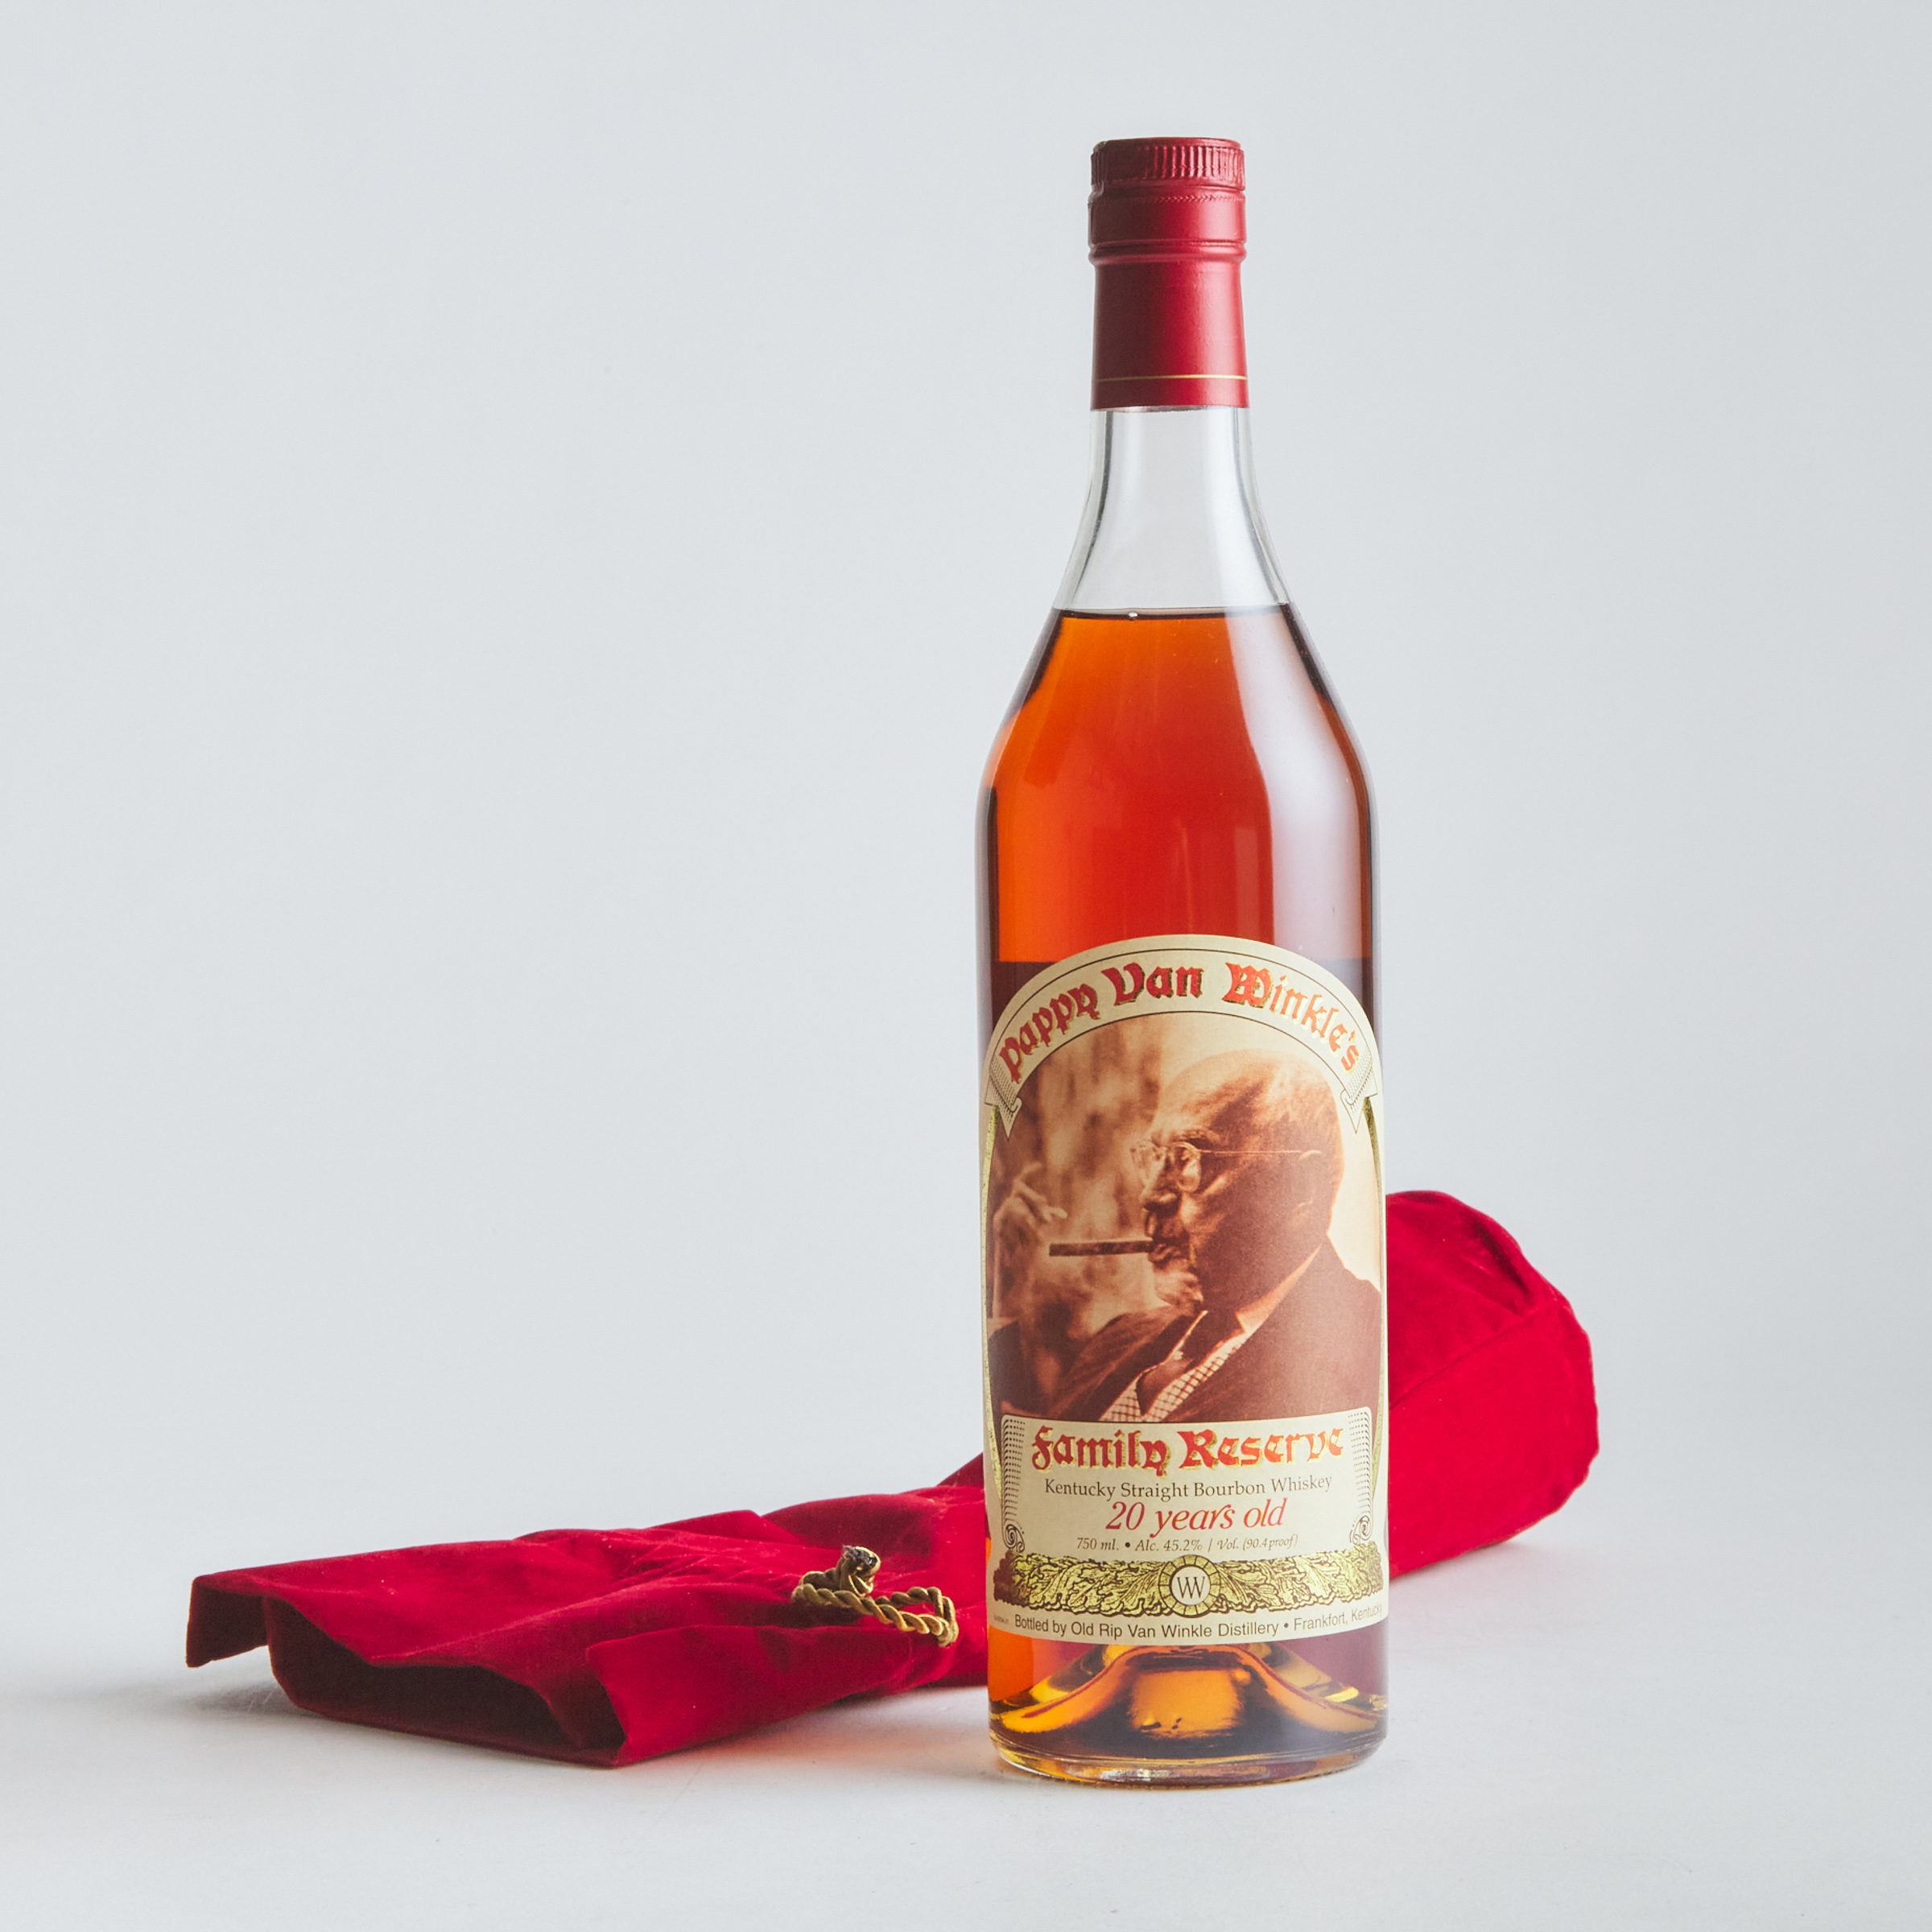 PAPPY VAN WINKLE FAMILY RESERVE KENTUCKY STRAIGHT BOURBON WHISKEY 20 YEARS (ONE 750 ML)